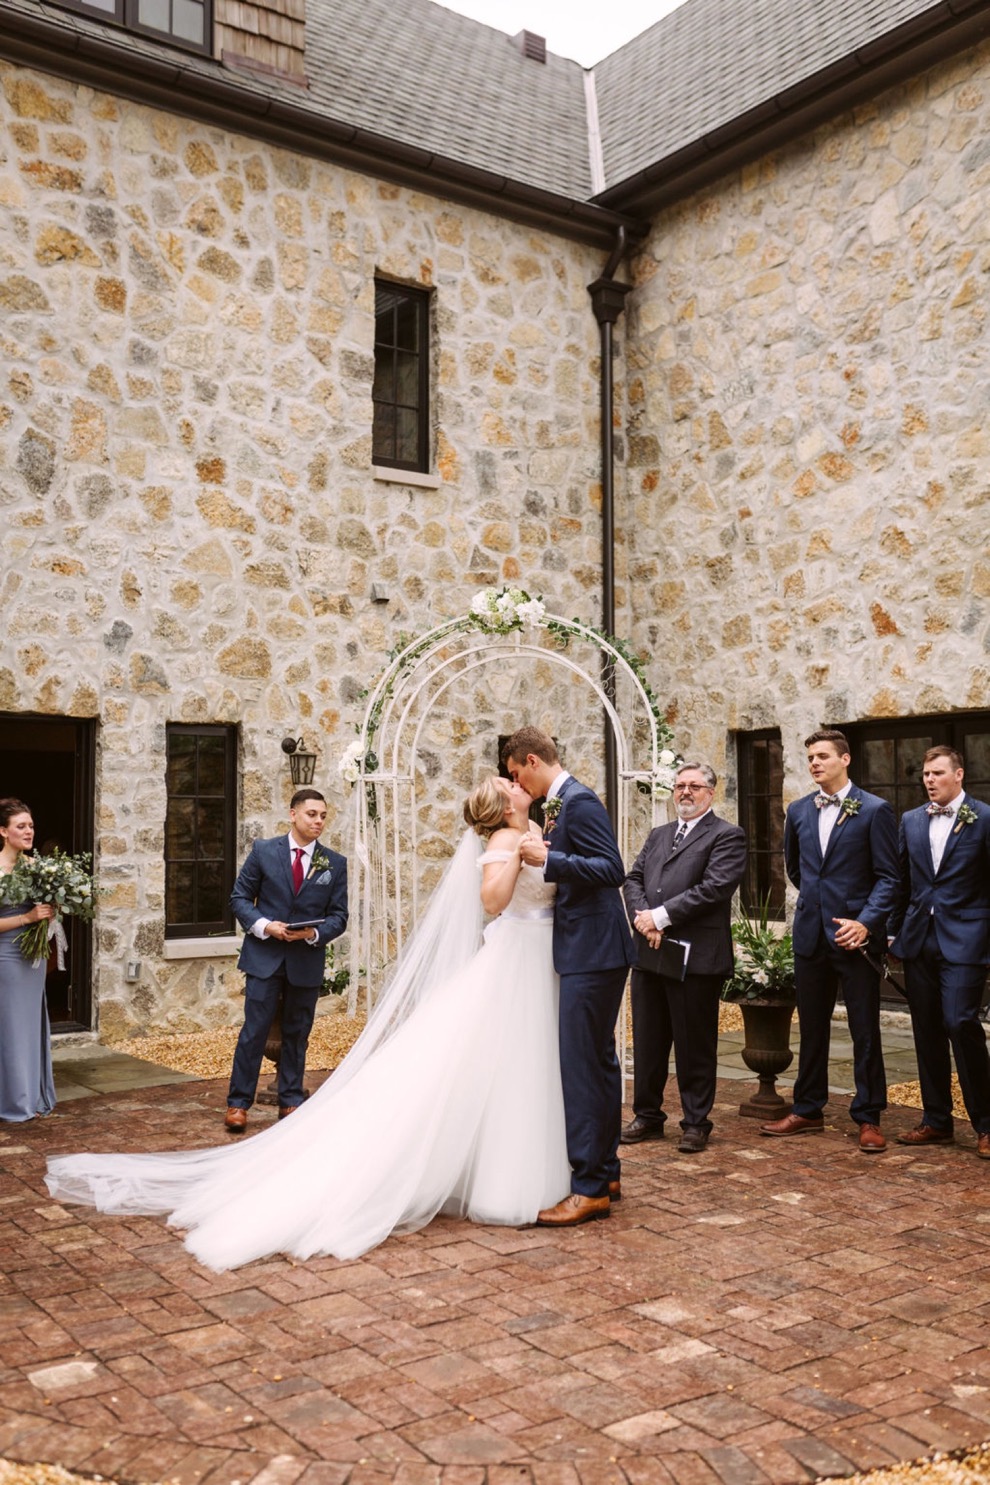 bride and groom kissing in the courtyard of a large stone house during backyard wedding ceremony